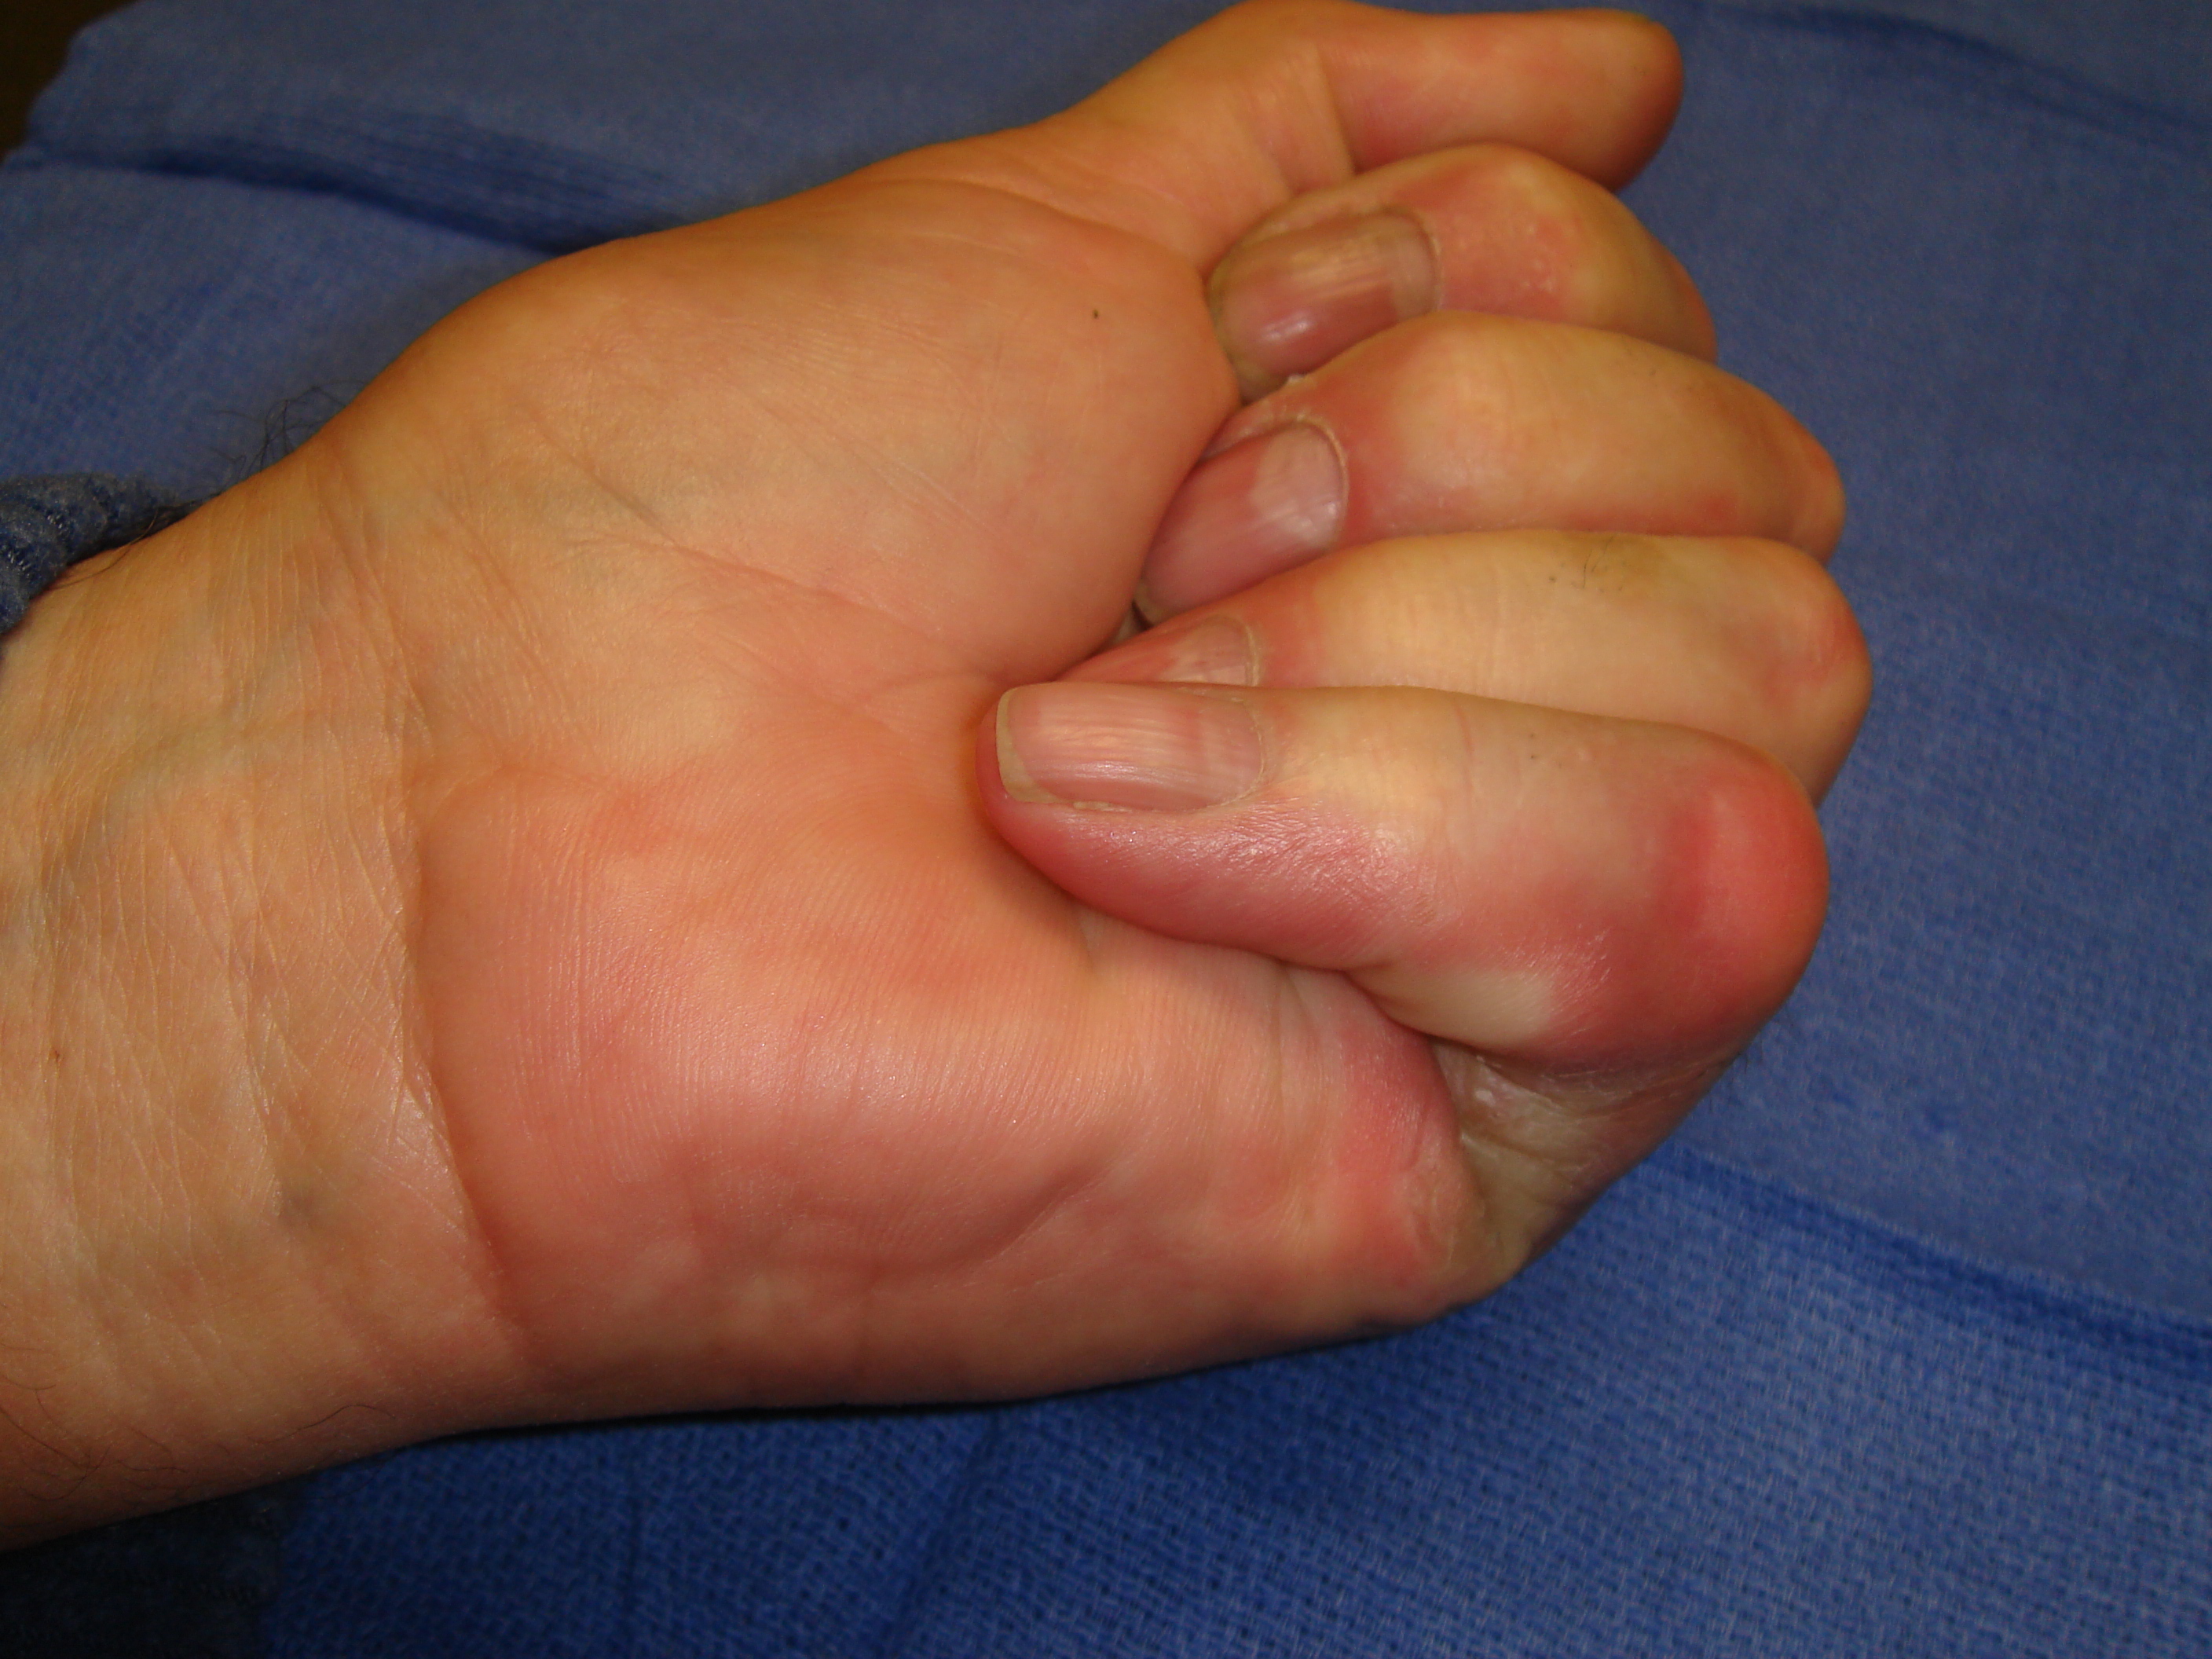 Figure 6g: Two months post-manipulation, the skin tear is healed. He has useful but incomplete MP and PIP motion after enzyme correction of the contractures. Limited little finger distal interphalangeal (DIP) joint flexion from osteoarthritis is evident with active grip.